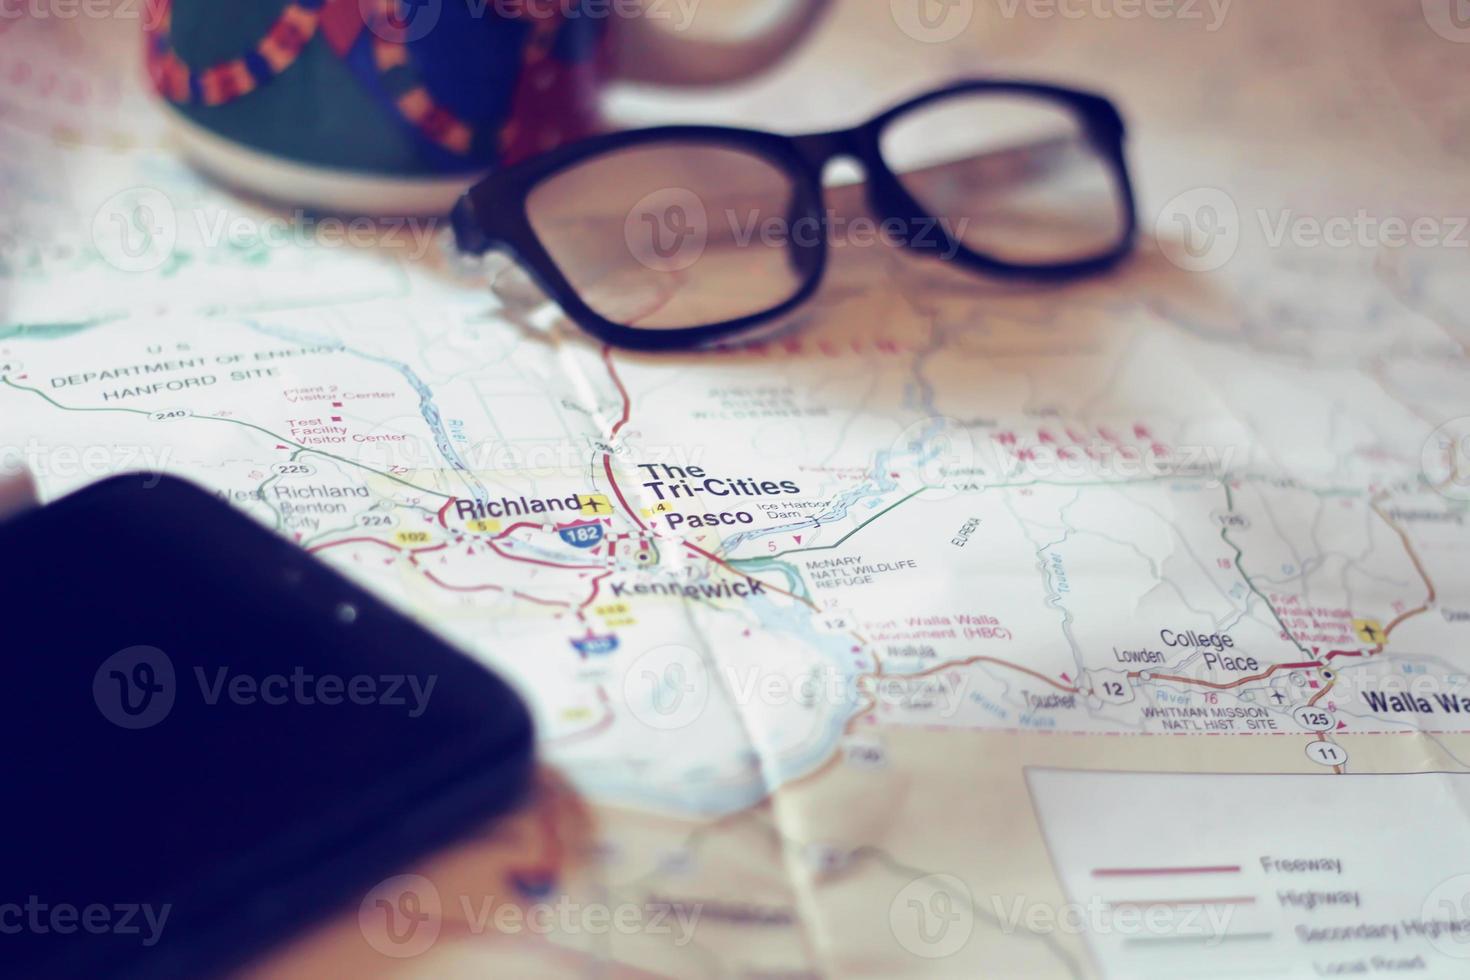 Map, map of Washington state, pen, glasses, cell phone, coffee cup on the table. photo